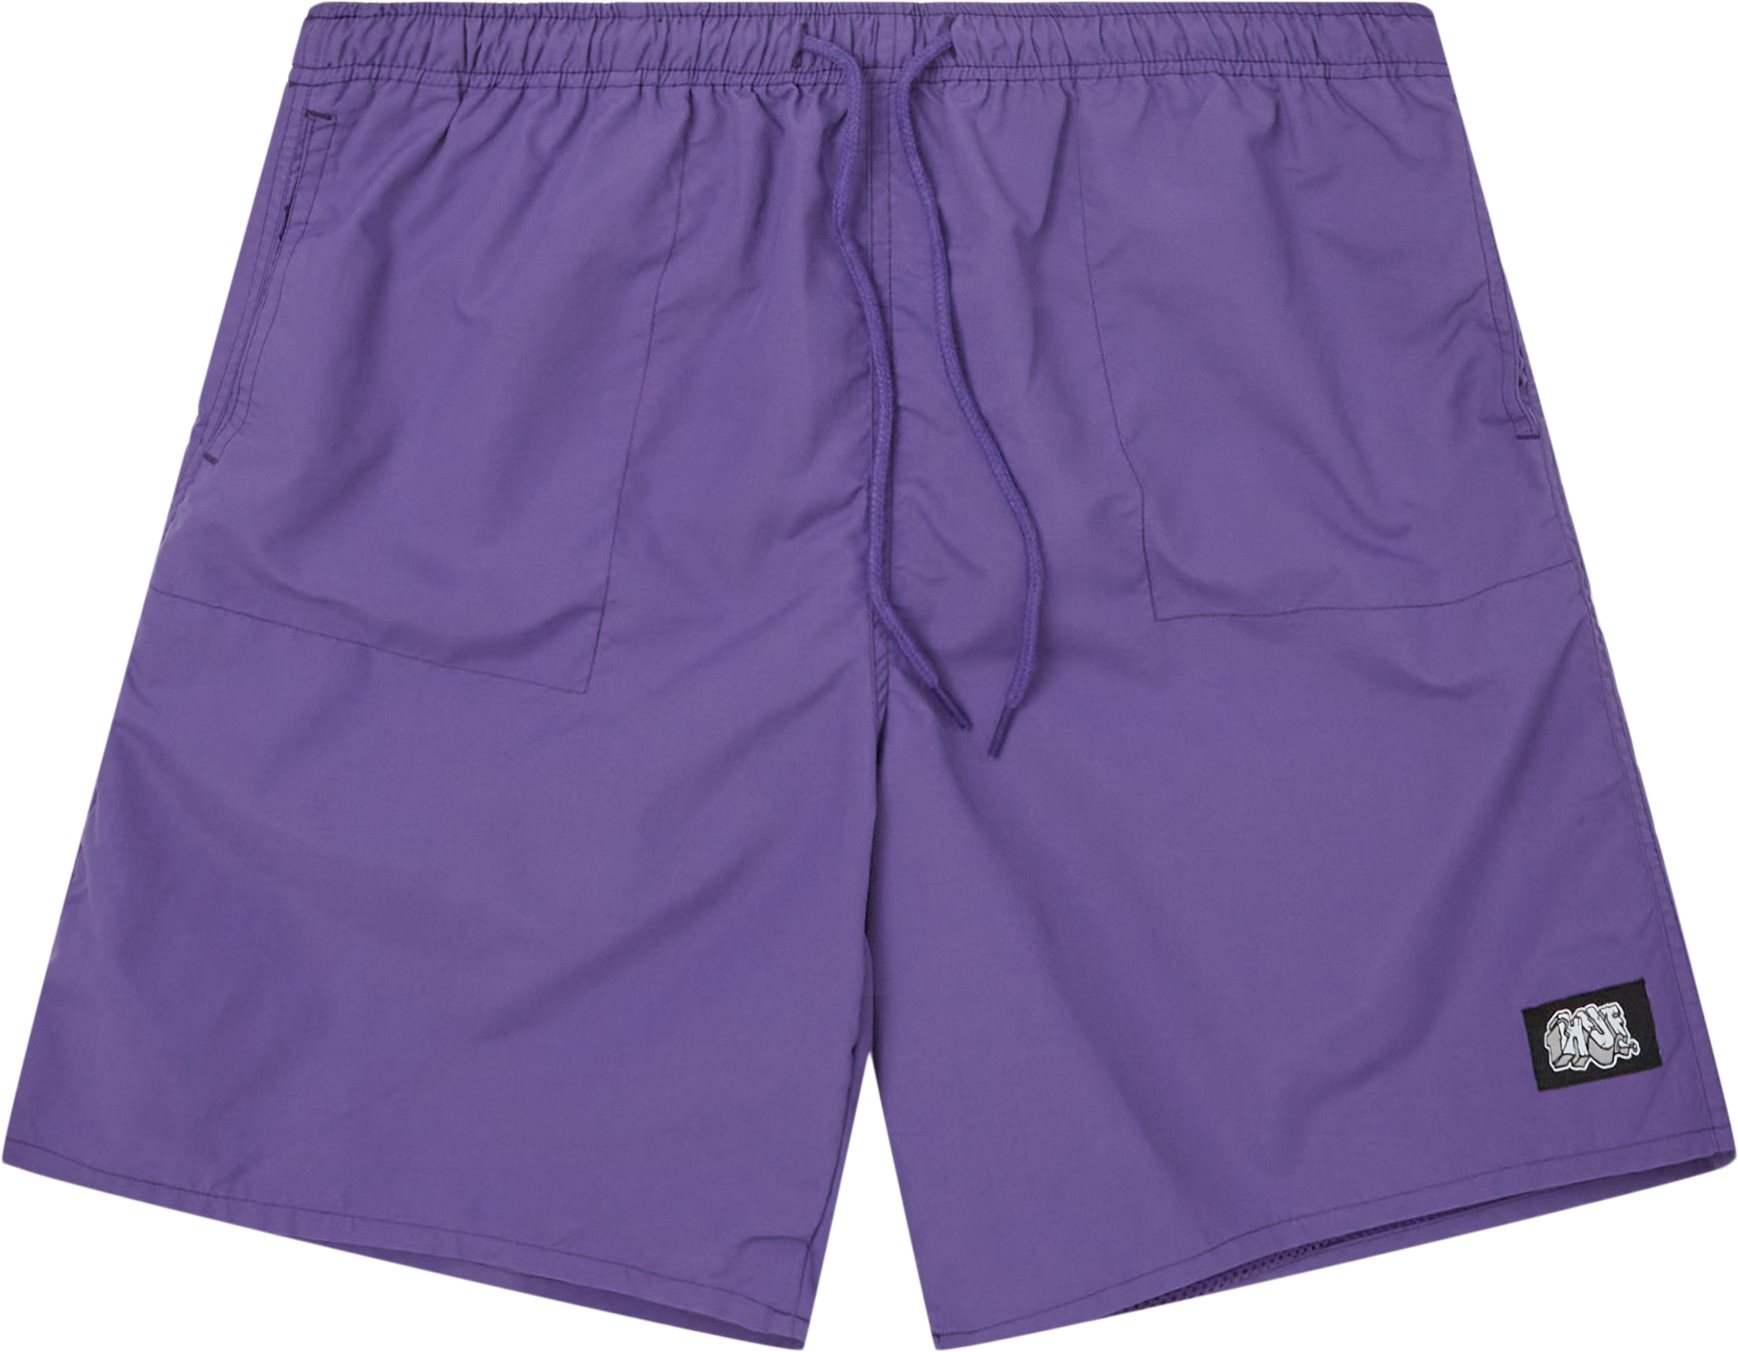 Hufquake Easy Short - Shorts - Regular fit - Lilac